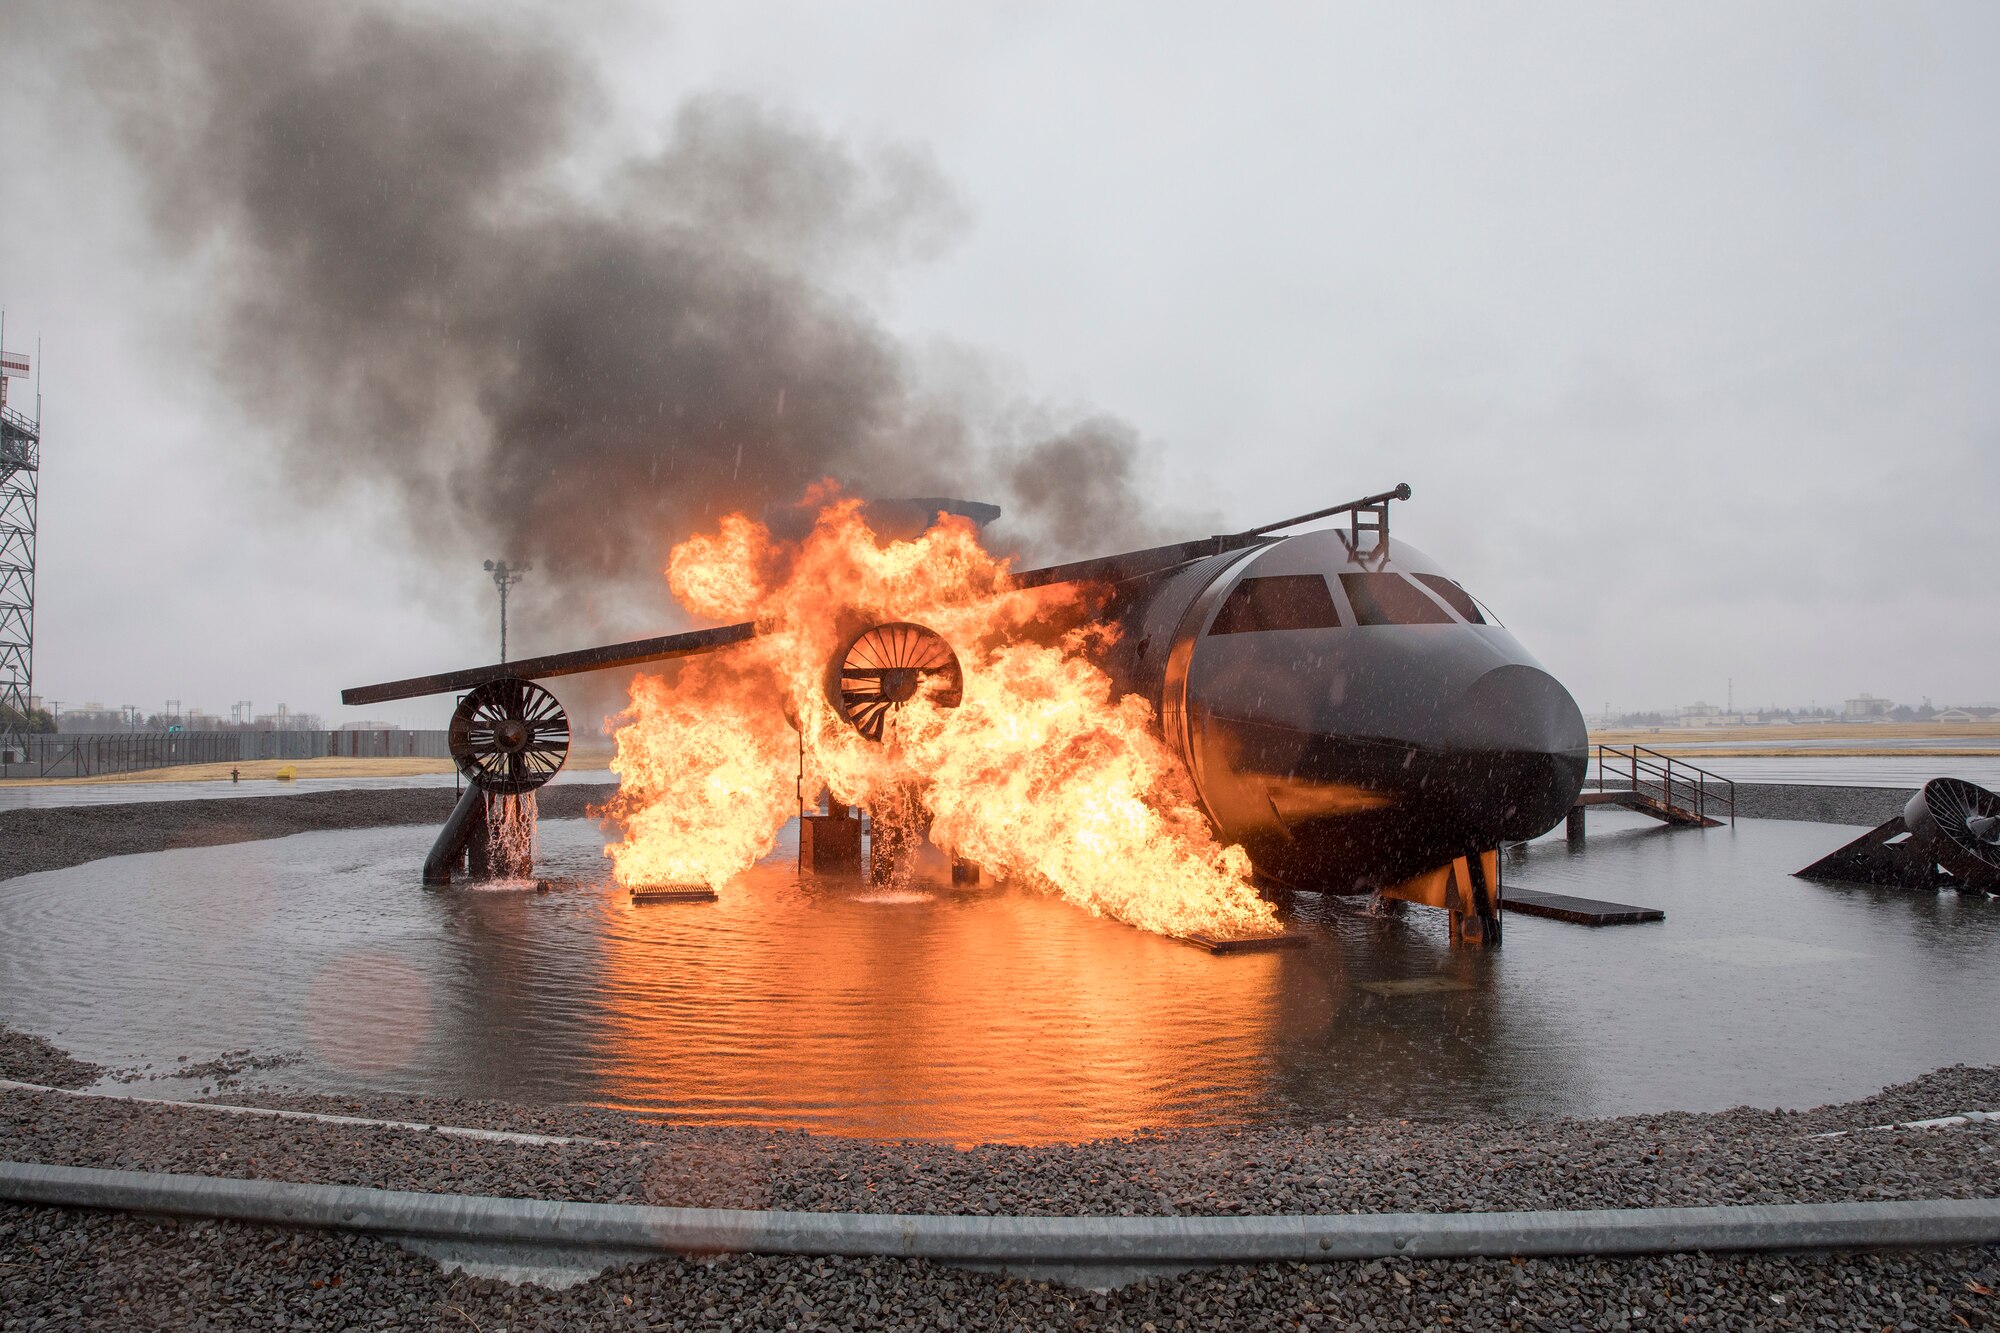 The 374th Civil Engineer Squadron fire and emergency services flight conduct live-fire training with an aircraft fire simulator at Yokota Air Base,